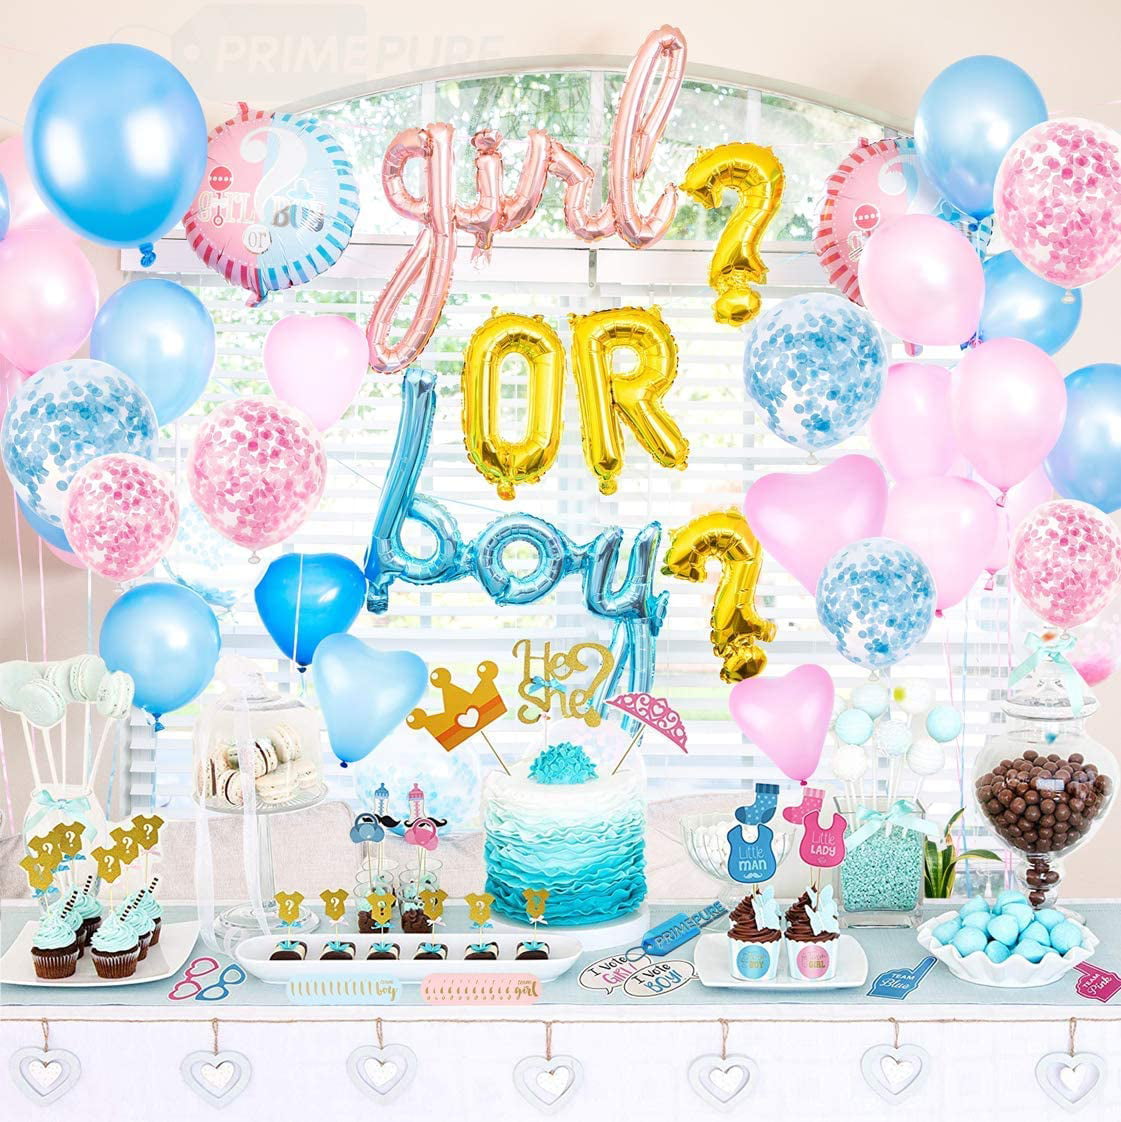 111 Piece Premium Kit Boy or Girl Banner Baby Gender Reveal Party Supplies and Decorations Pink and Blue Balloons Great with Smoke Bombs and Confetti Cannon 36 inch Gender Reveal Balloon 